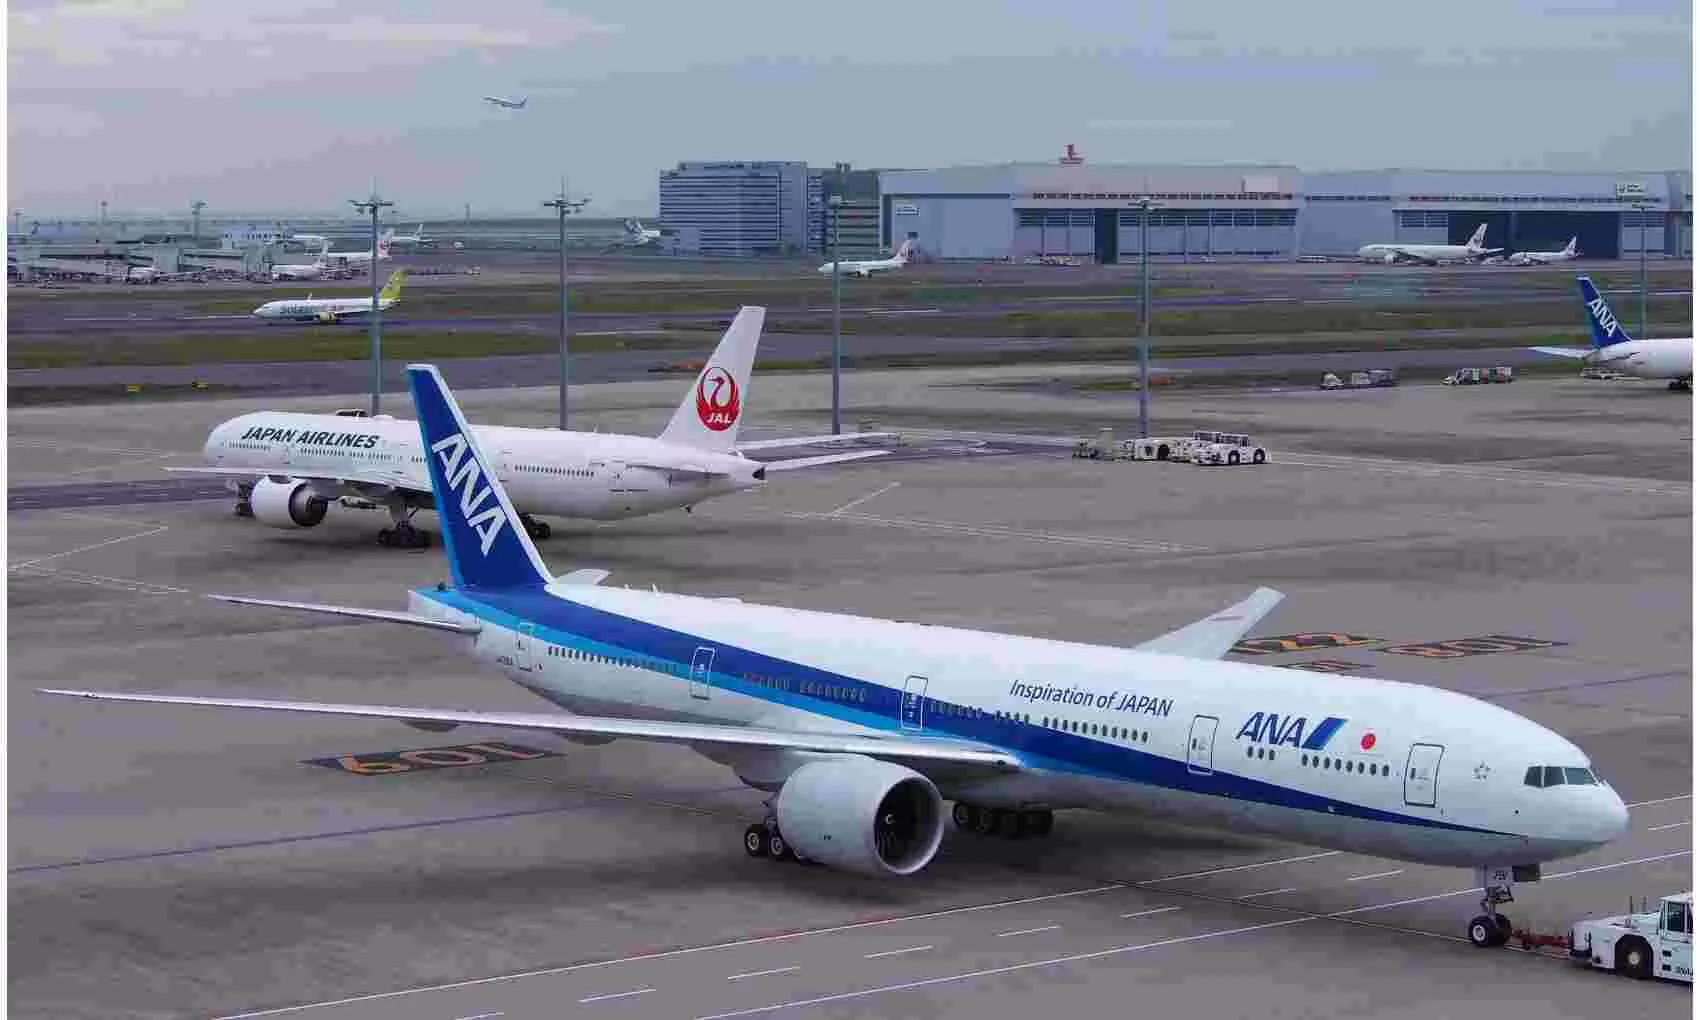 ANA groups FY 2022 flight schedule to focus on maximising freighter operation